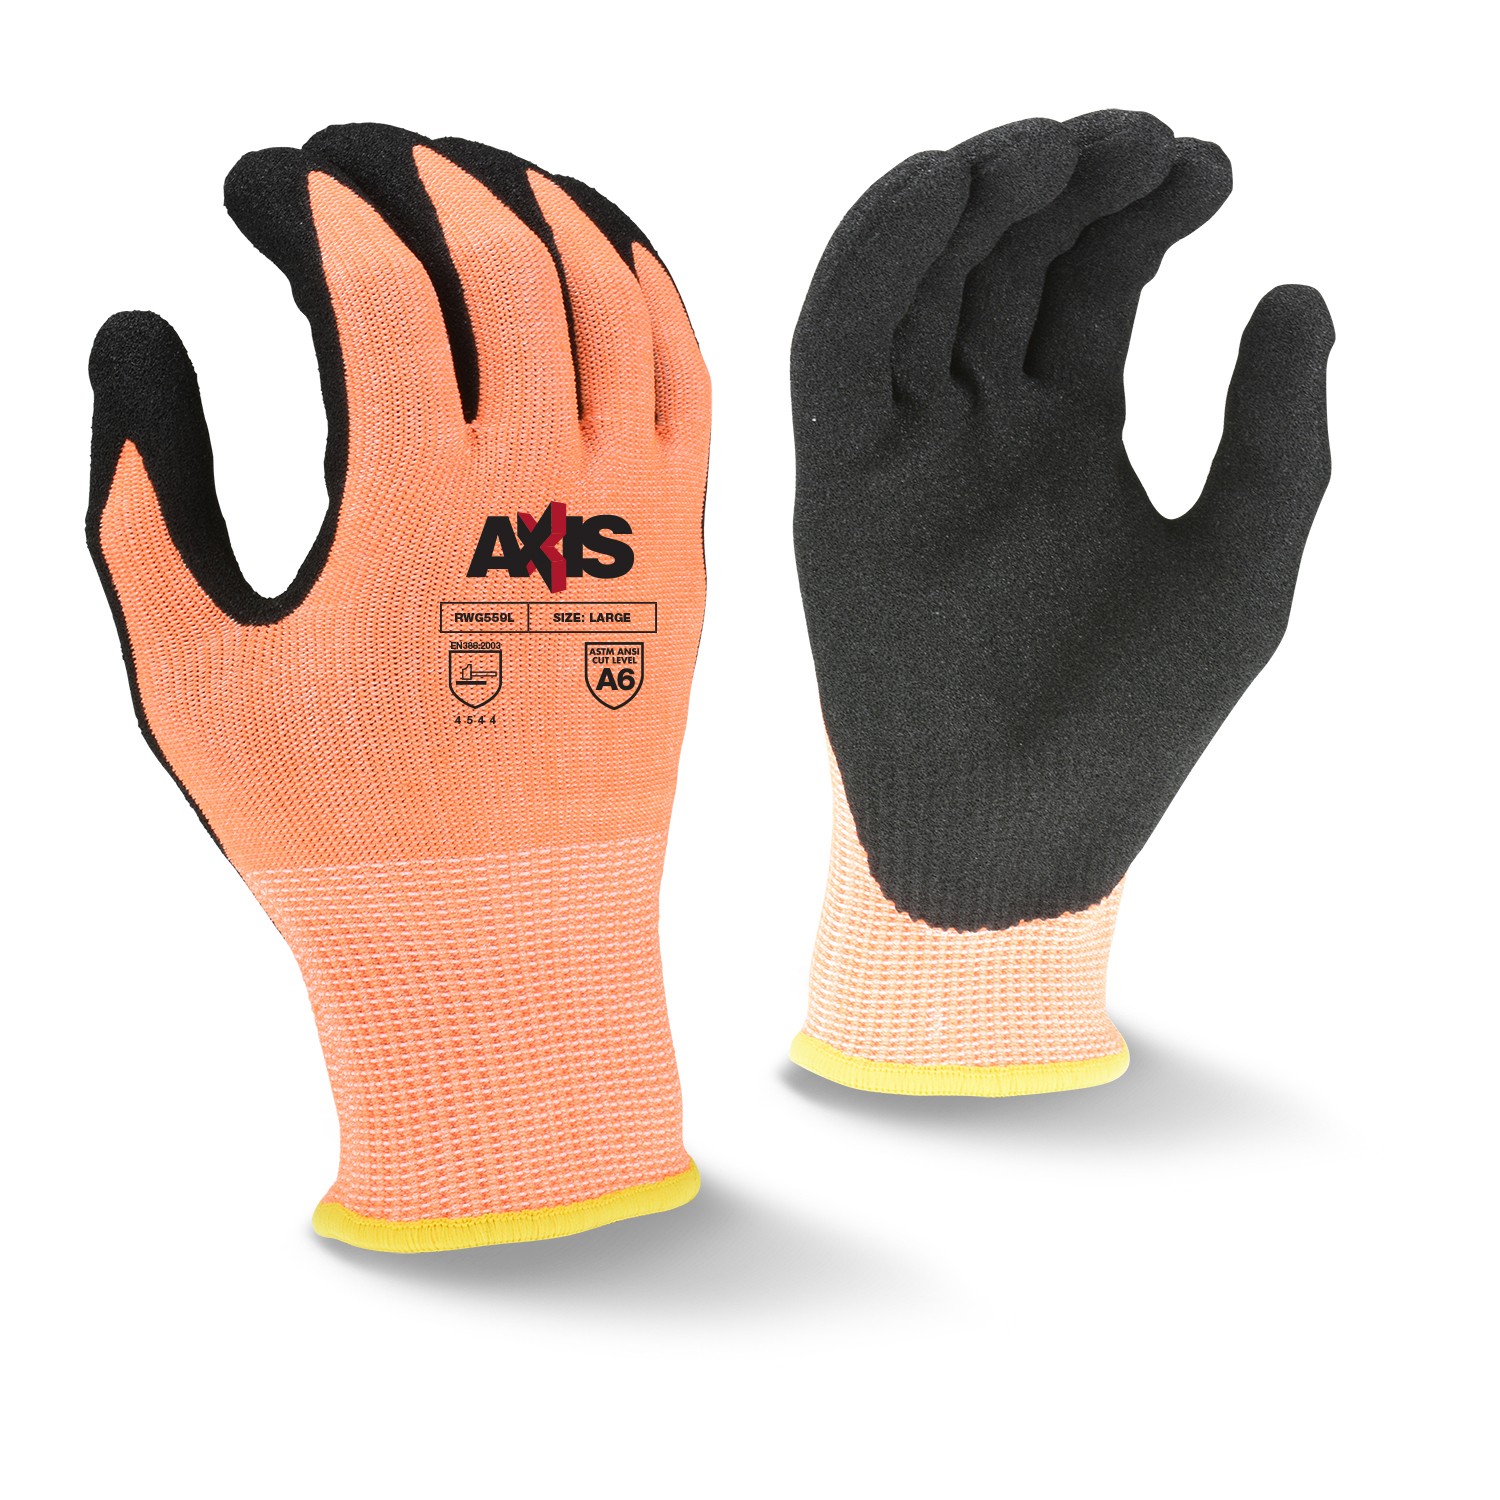 Axis™ Cut Protection Level A6 Sandy Nitrile Coated Glove (#RWG559)